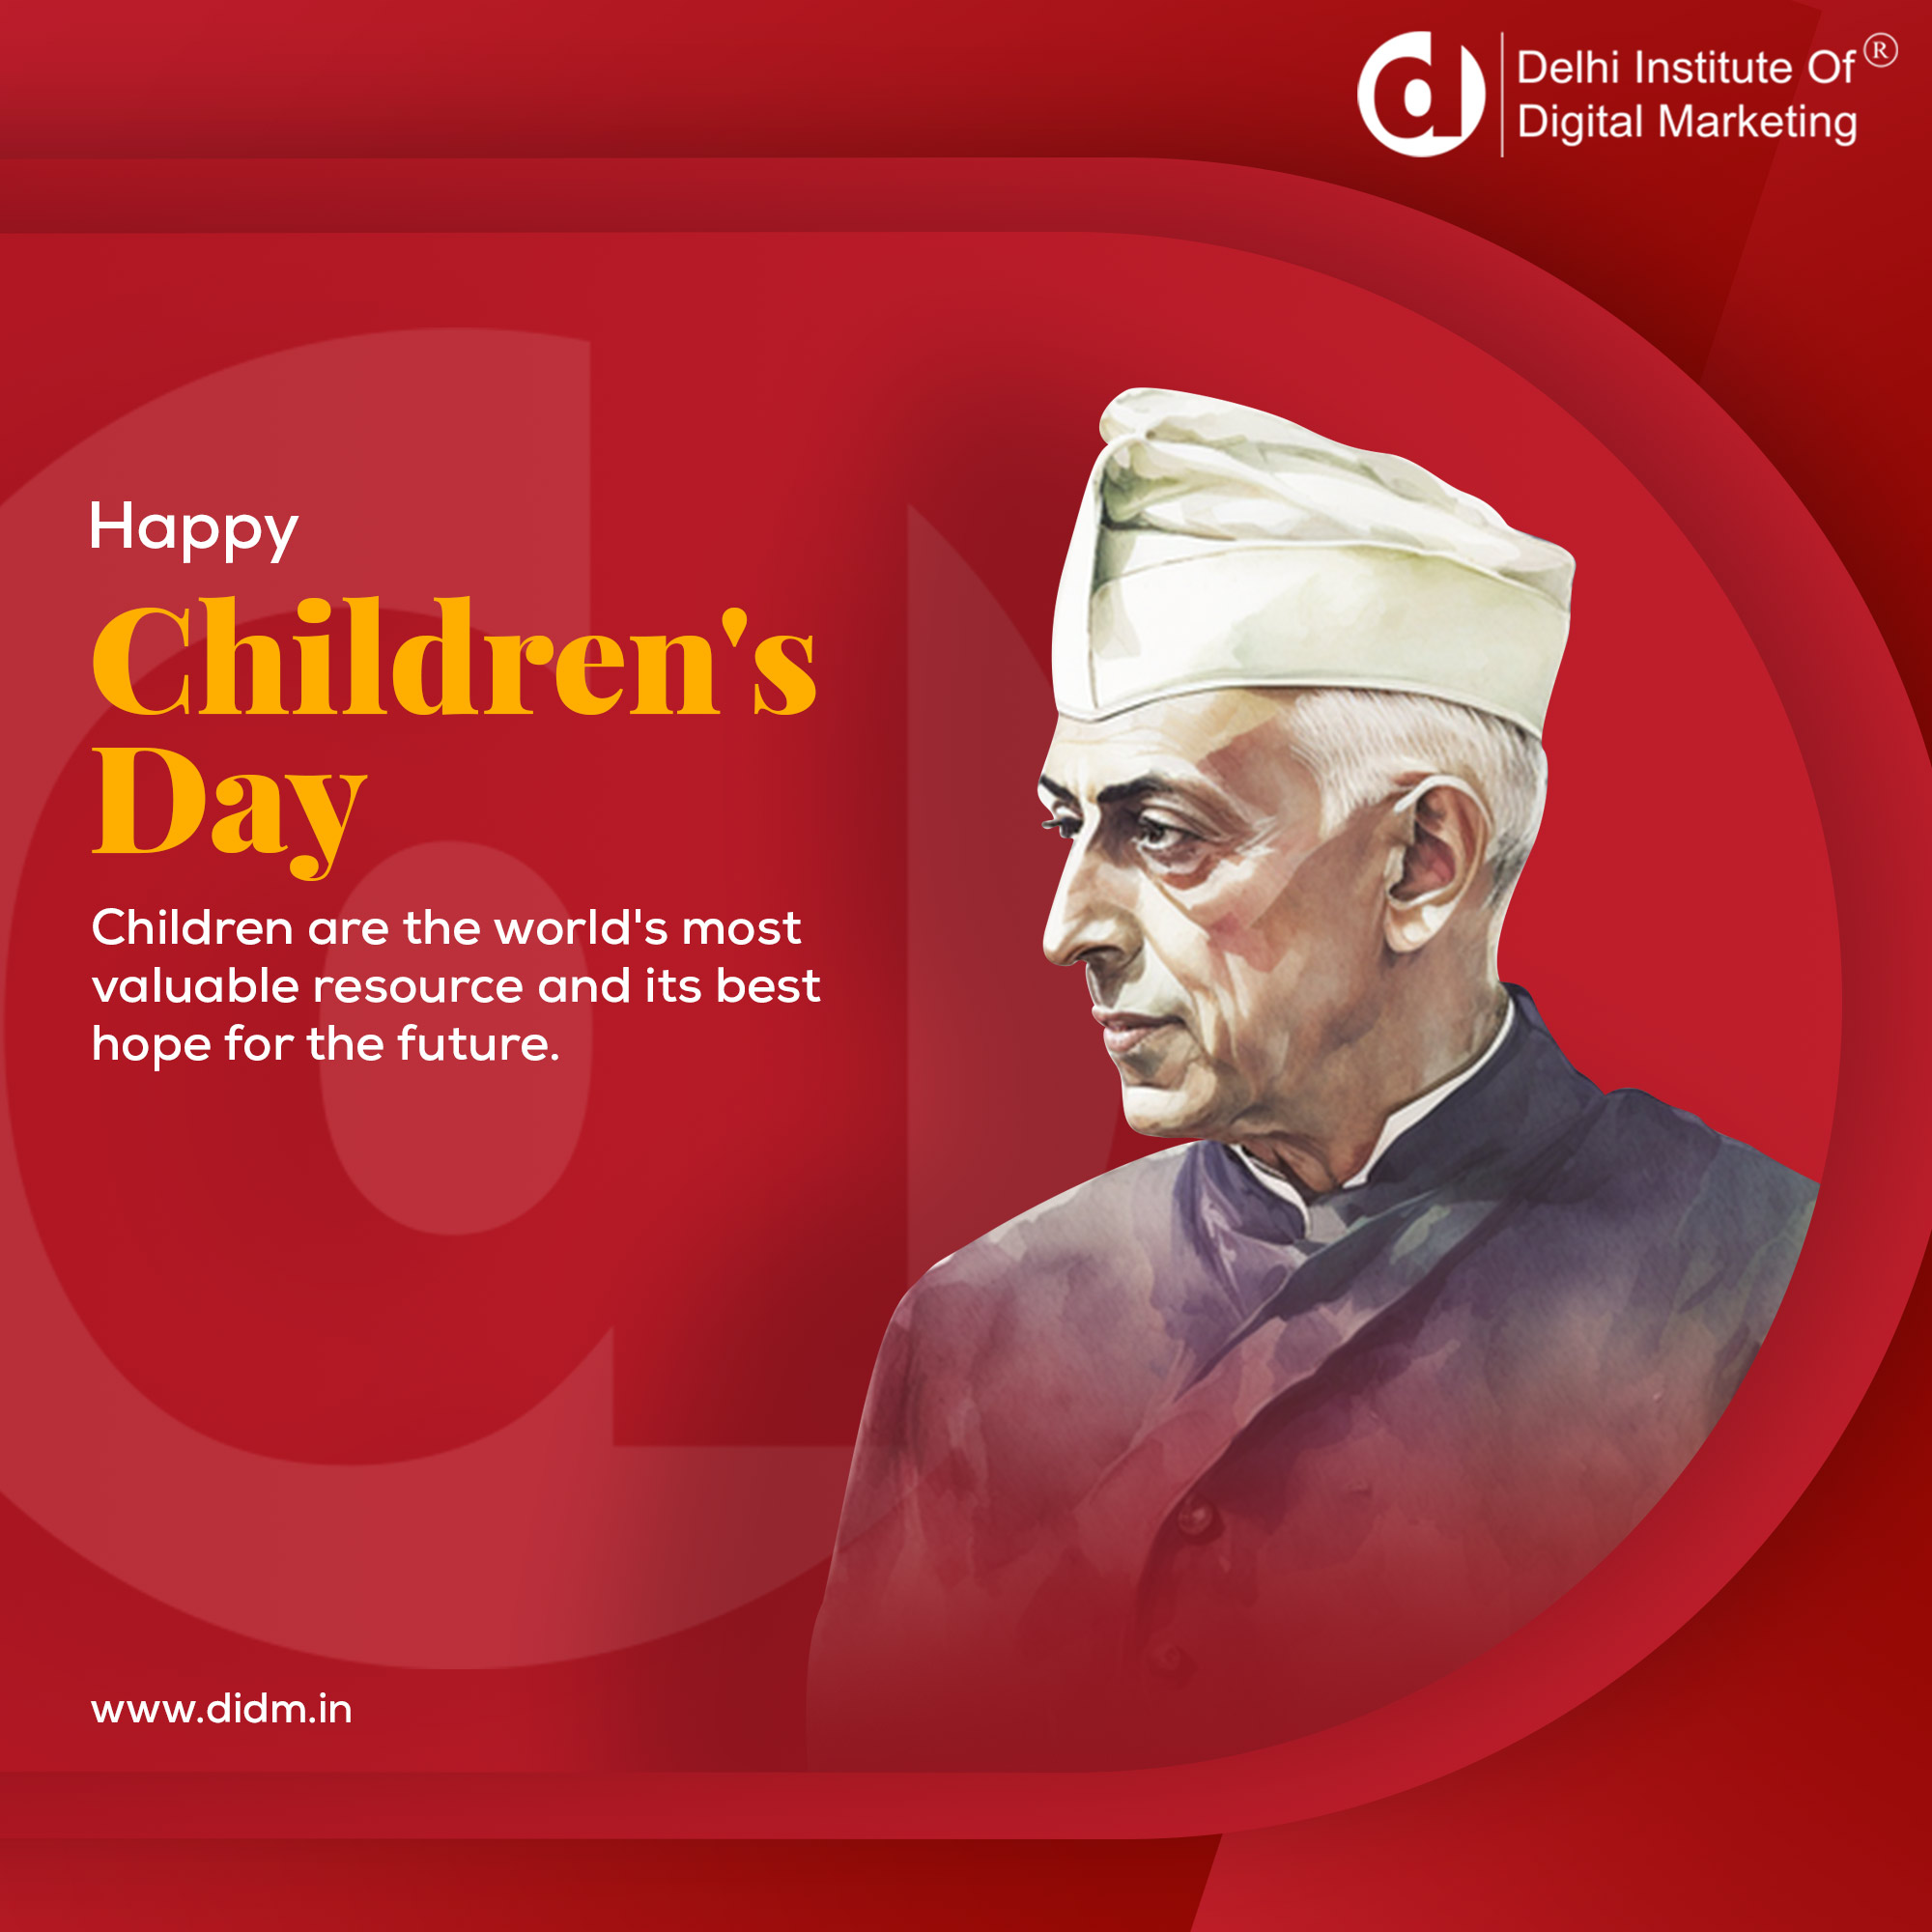 Wishing You All A Very Happy Children's Day